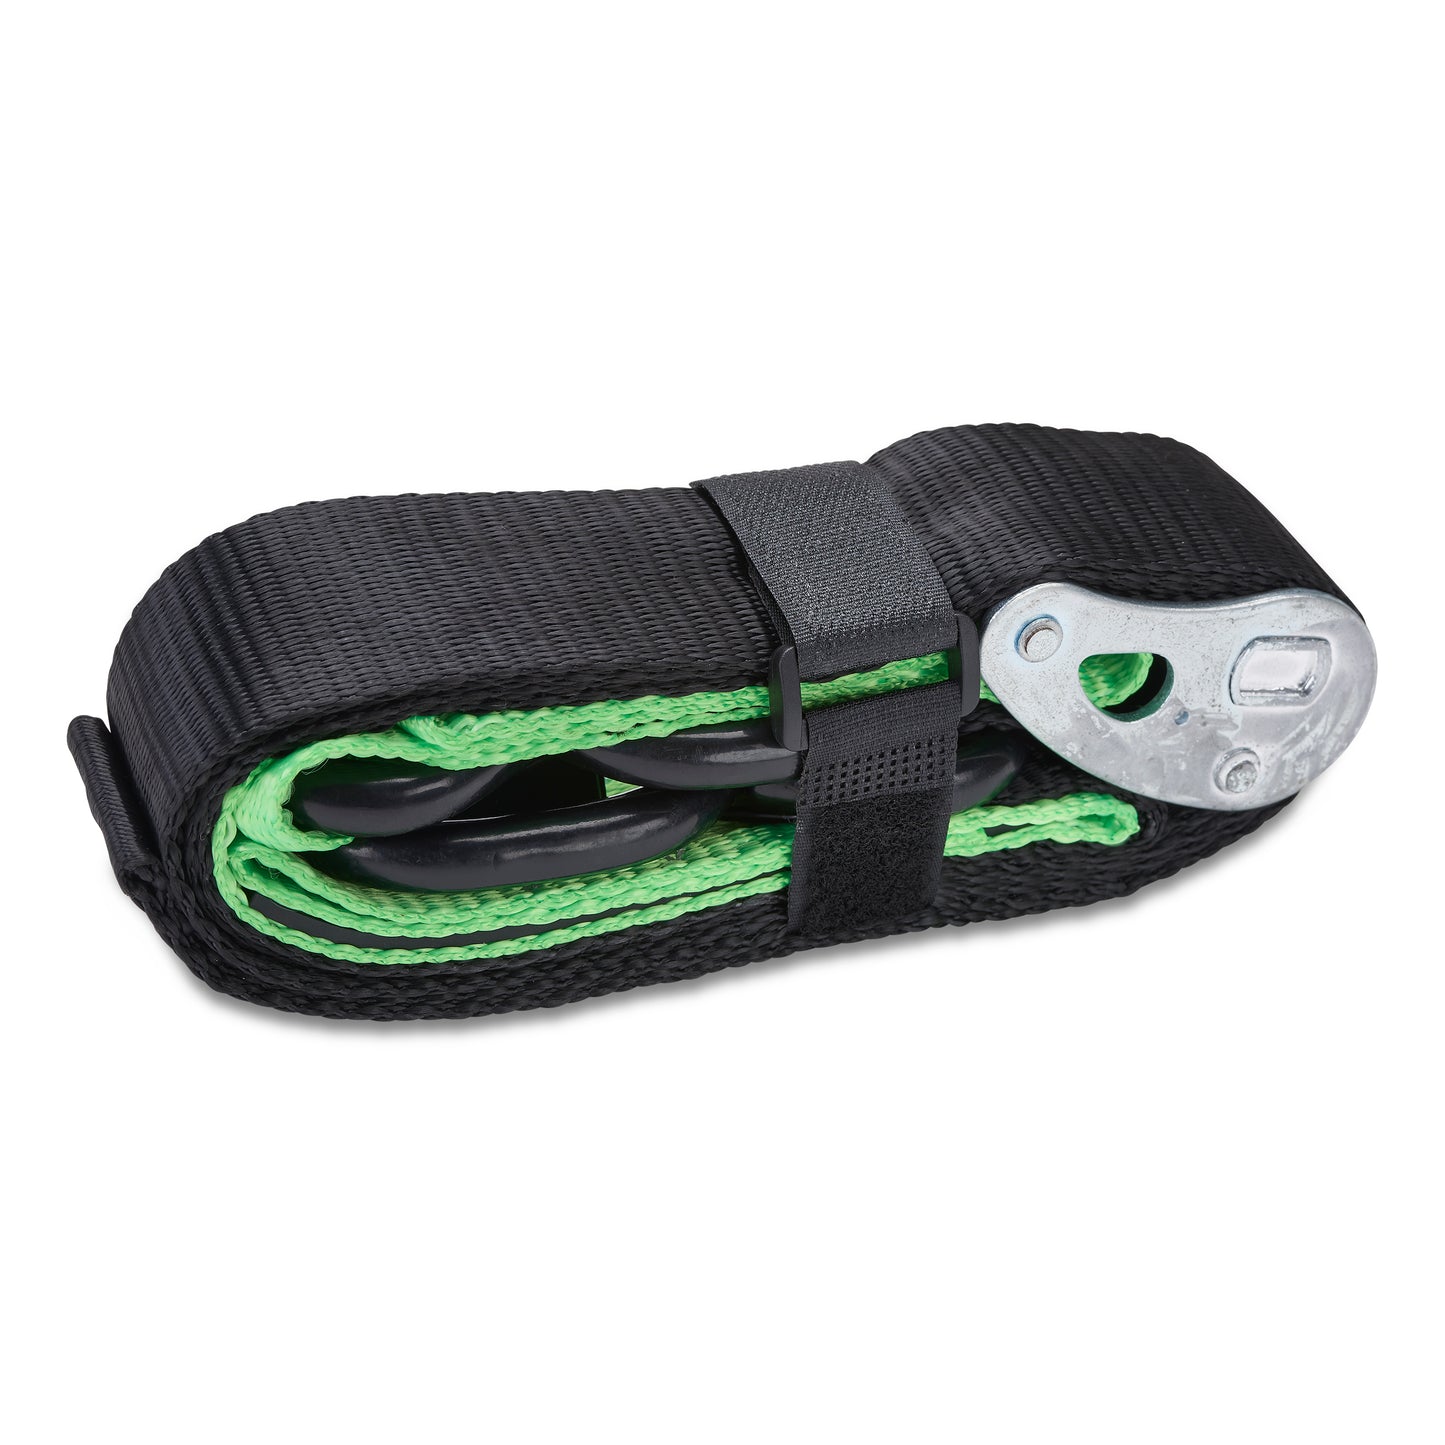 Heavy Duty Cam Buckle Tie Downs (2) Motorcycle Tie Downs w/Integrated Soft Tie Hook & Velcro. Cargo Straps, Mountain Bike, E-Bike, Cambuckle Tie Down Straps with Hooks (chromoly) (Green)